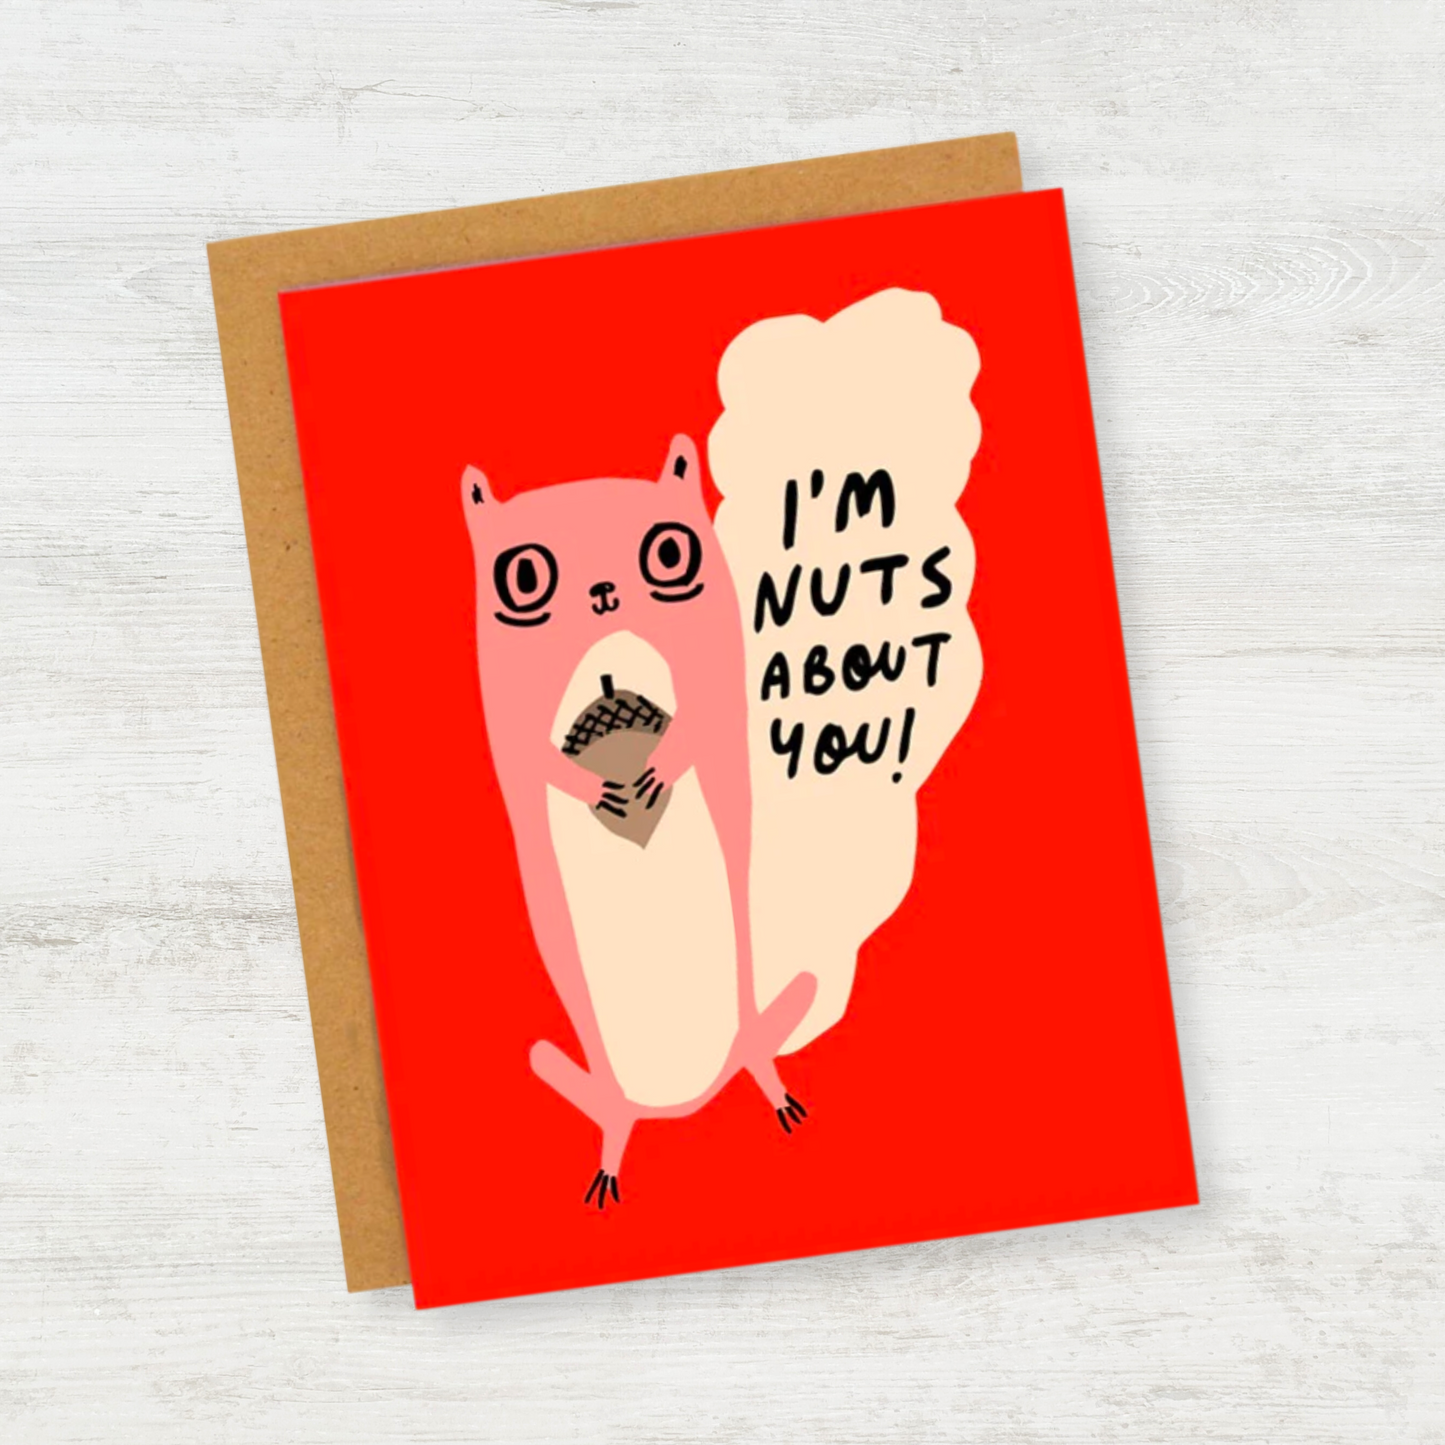 Nuts About You card